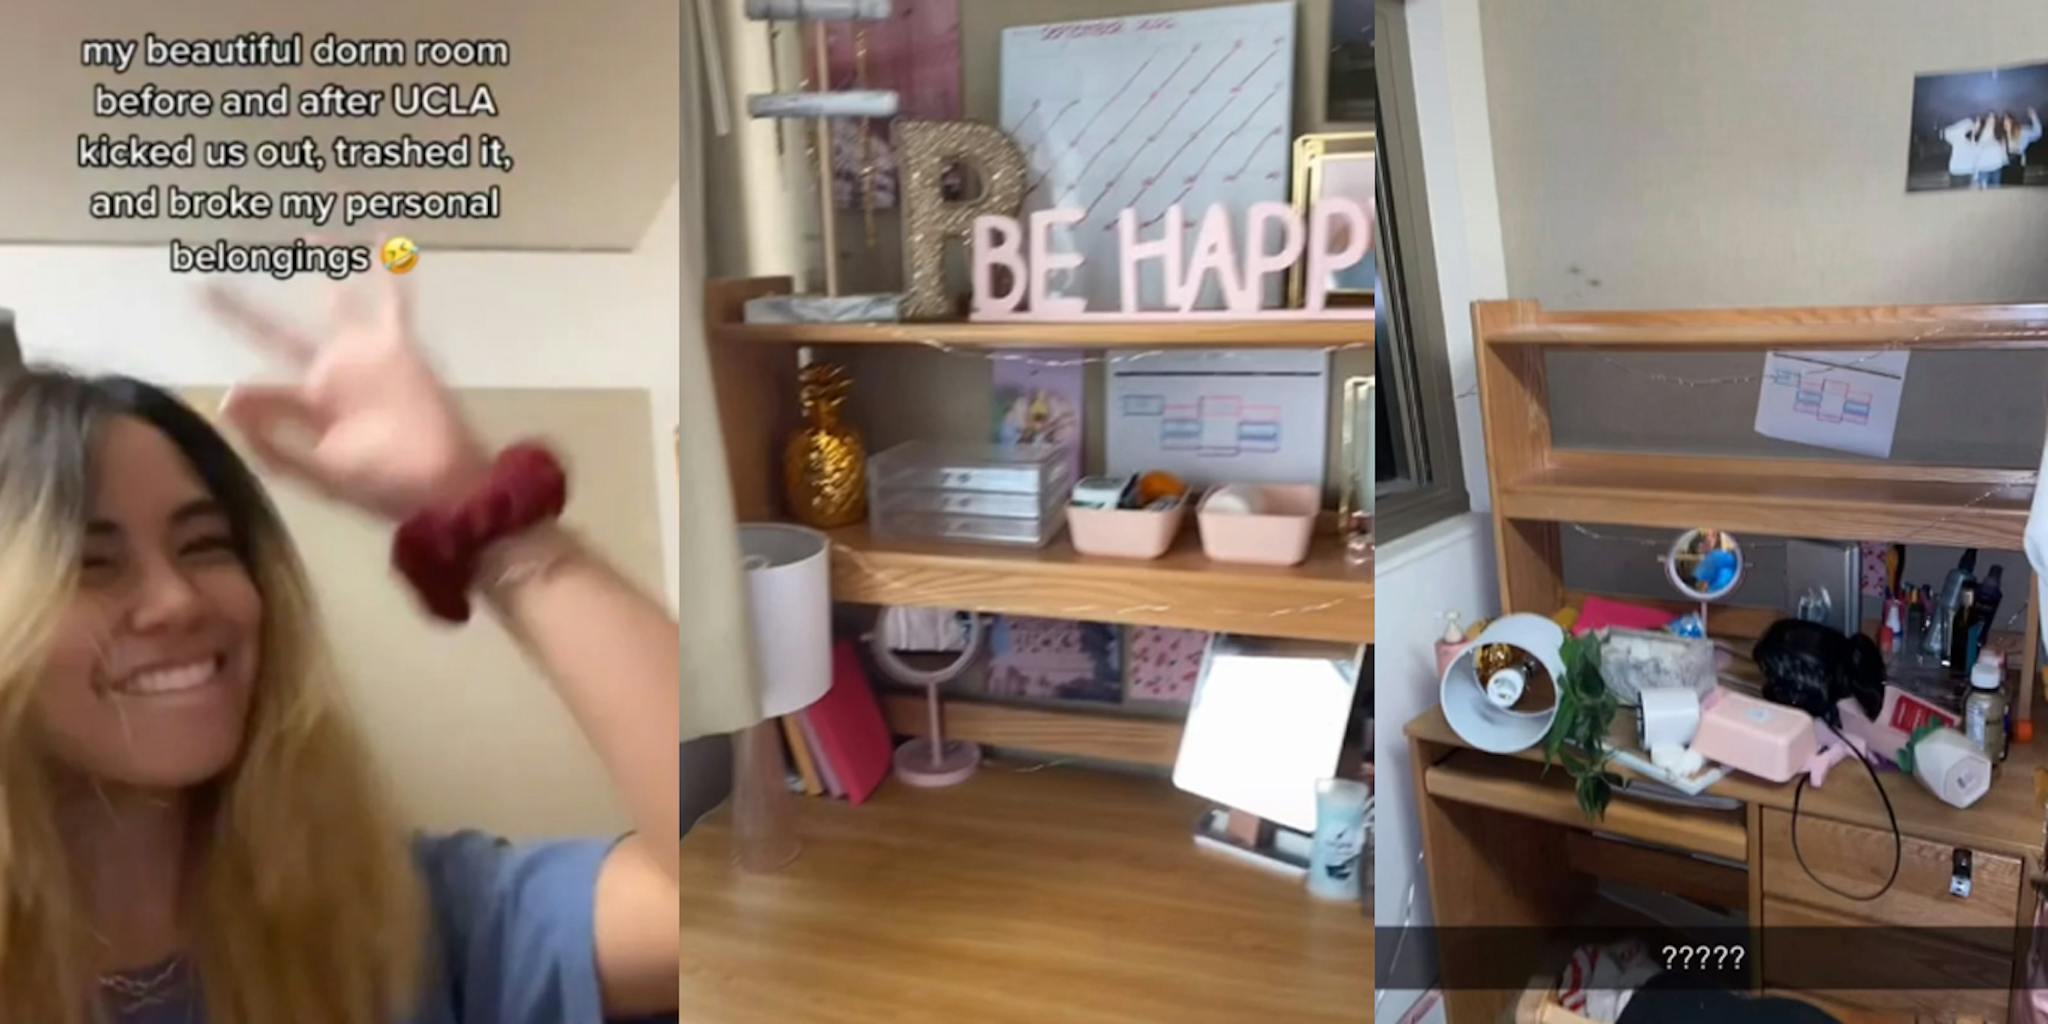 ‘Why do you have to trash my things and break my stuff?’: Student accuses university of destroying her housing in viral TikTok